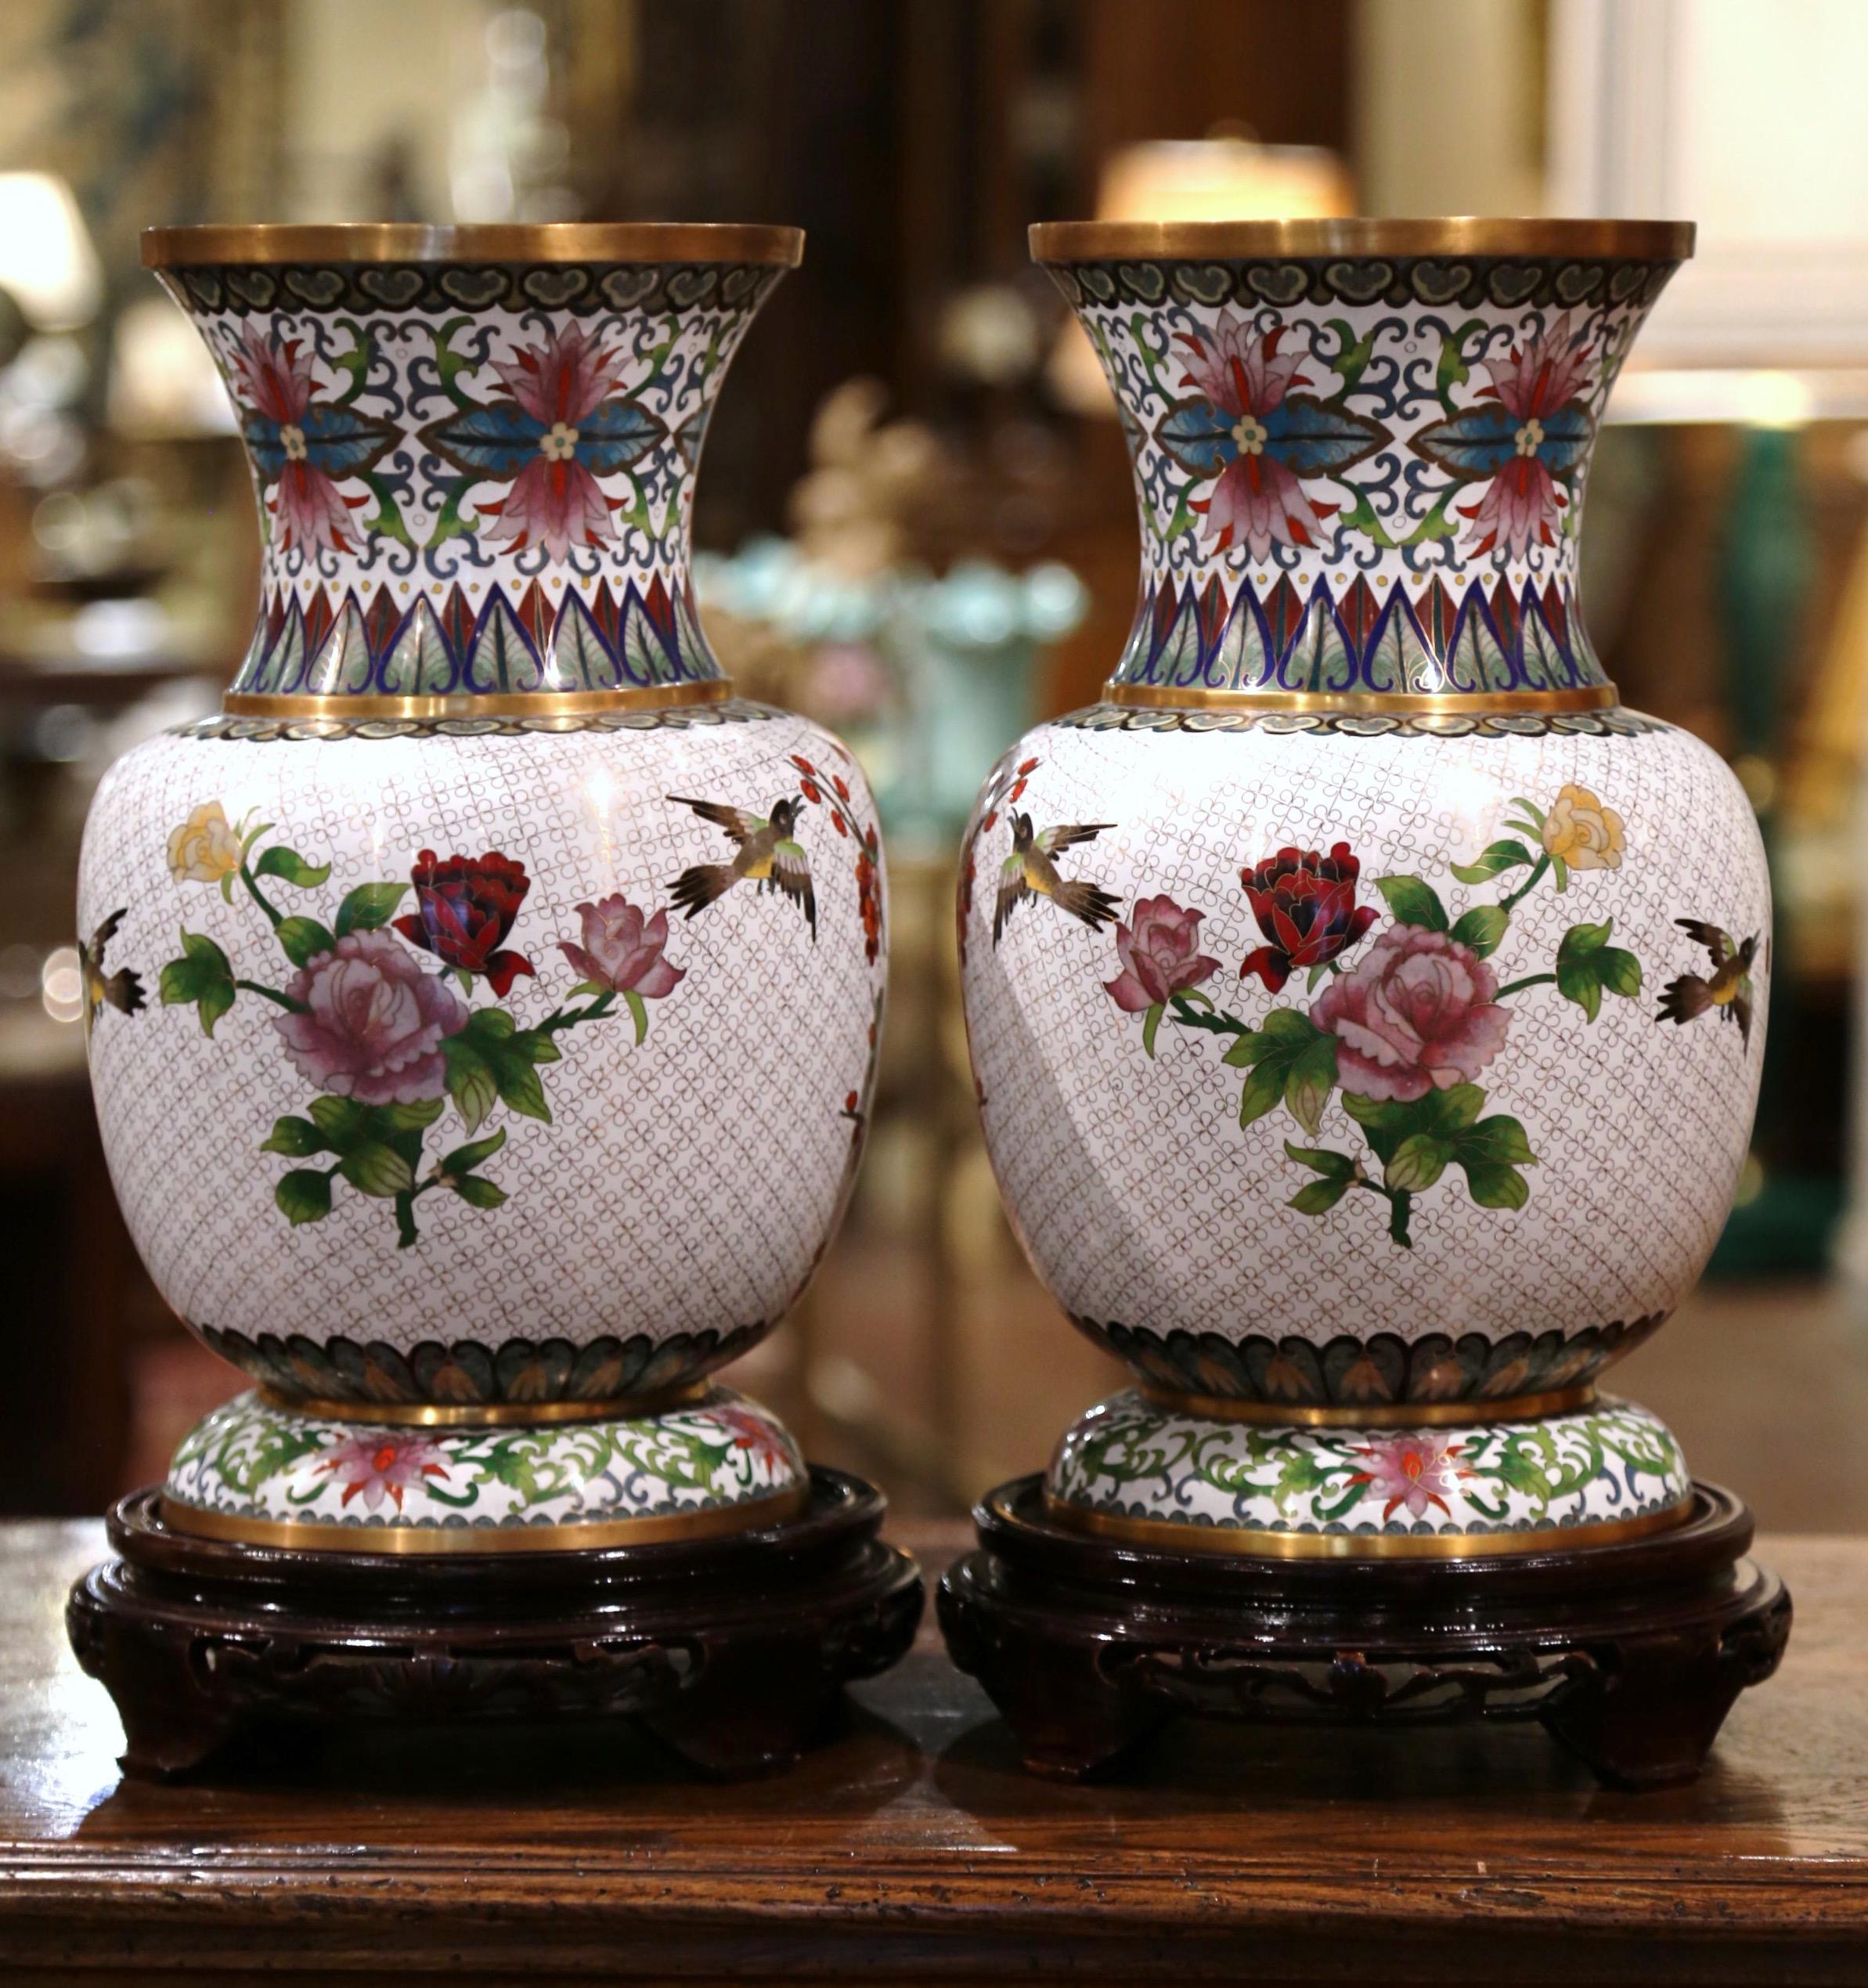 Pair of 20th Century Chinese Cloisonné Enamel Vases on Stand with Bird Decor 2